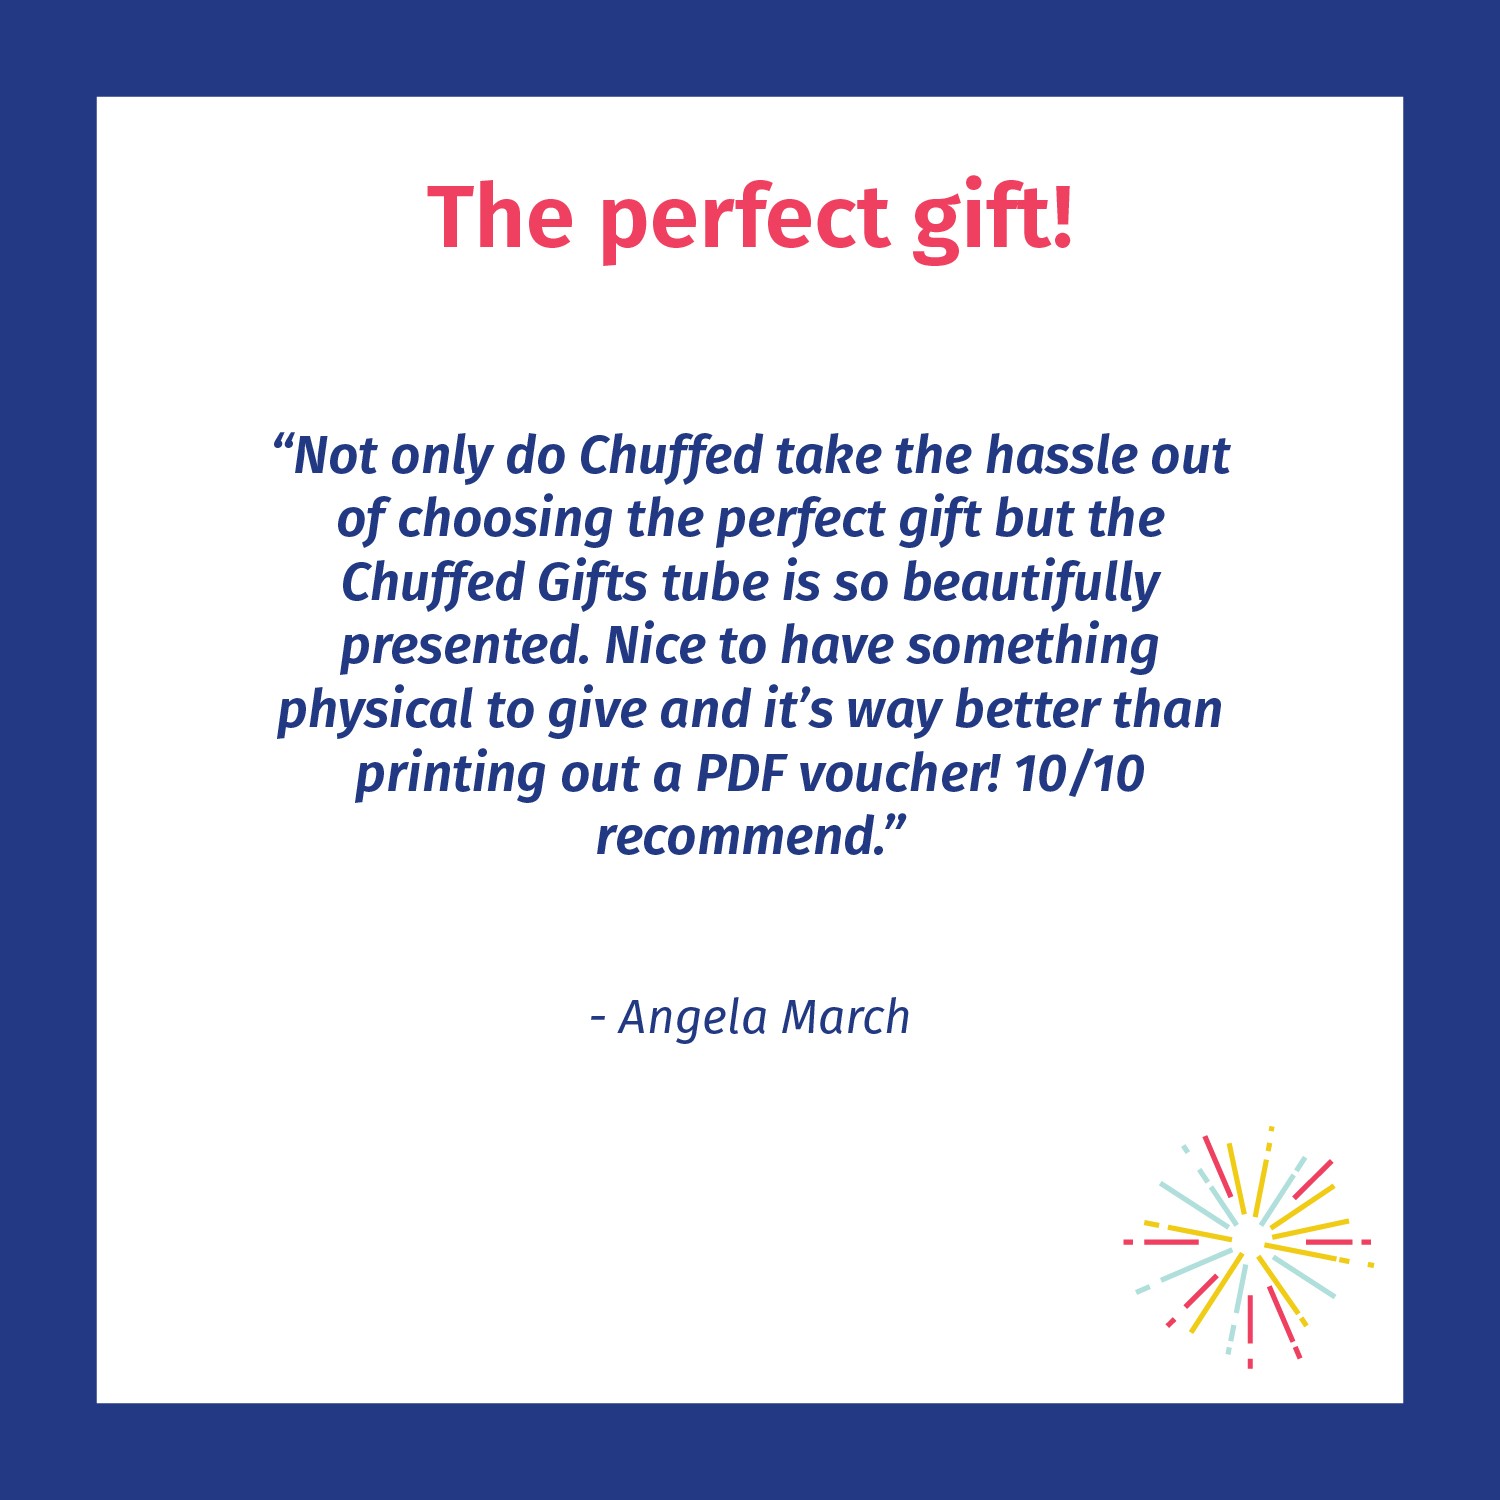 The perfect gift - Chuffed customer review